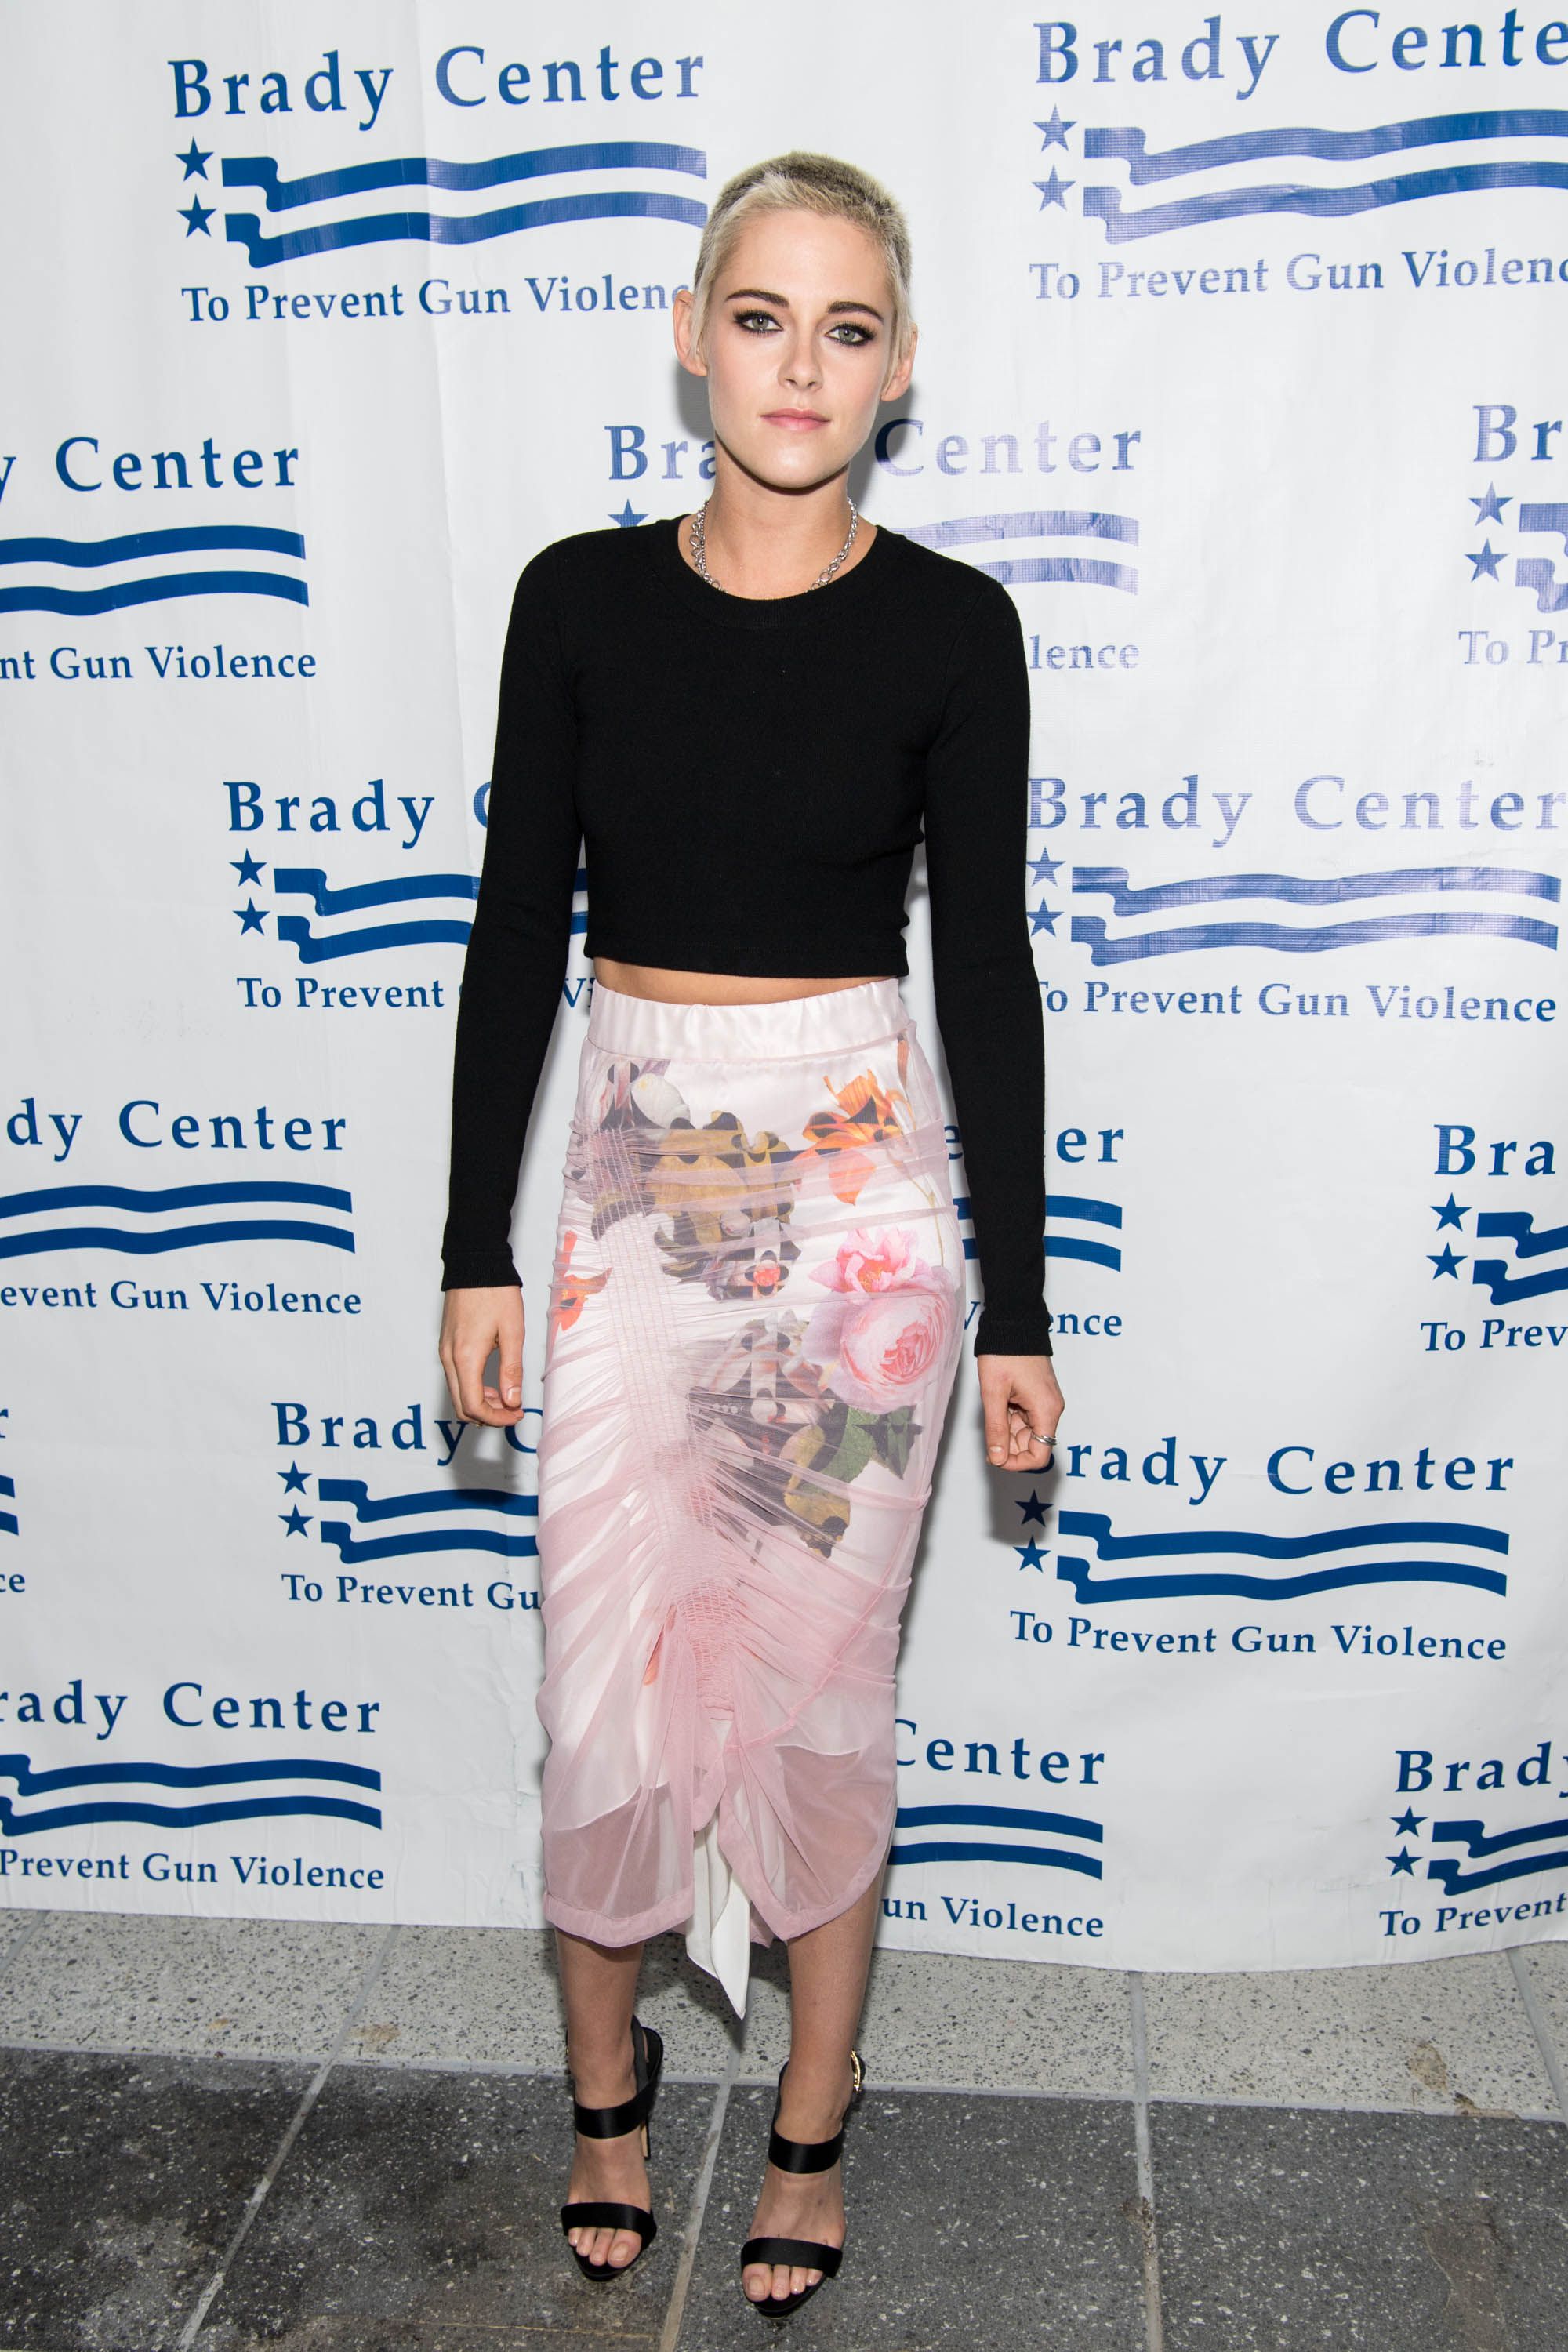 Kristen Stewart Style File: Over 90 Of Her Best Fashion and Style